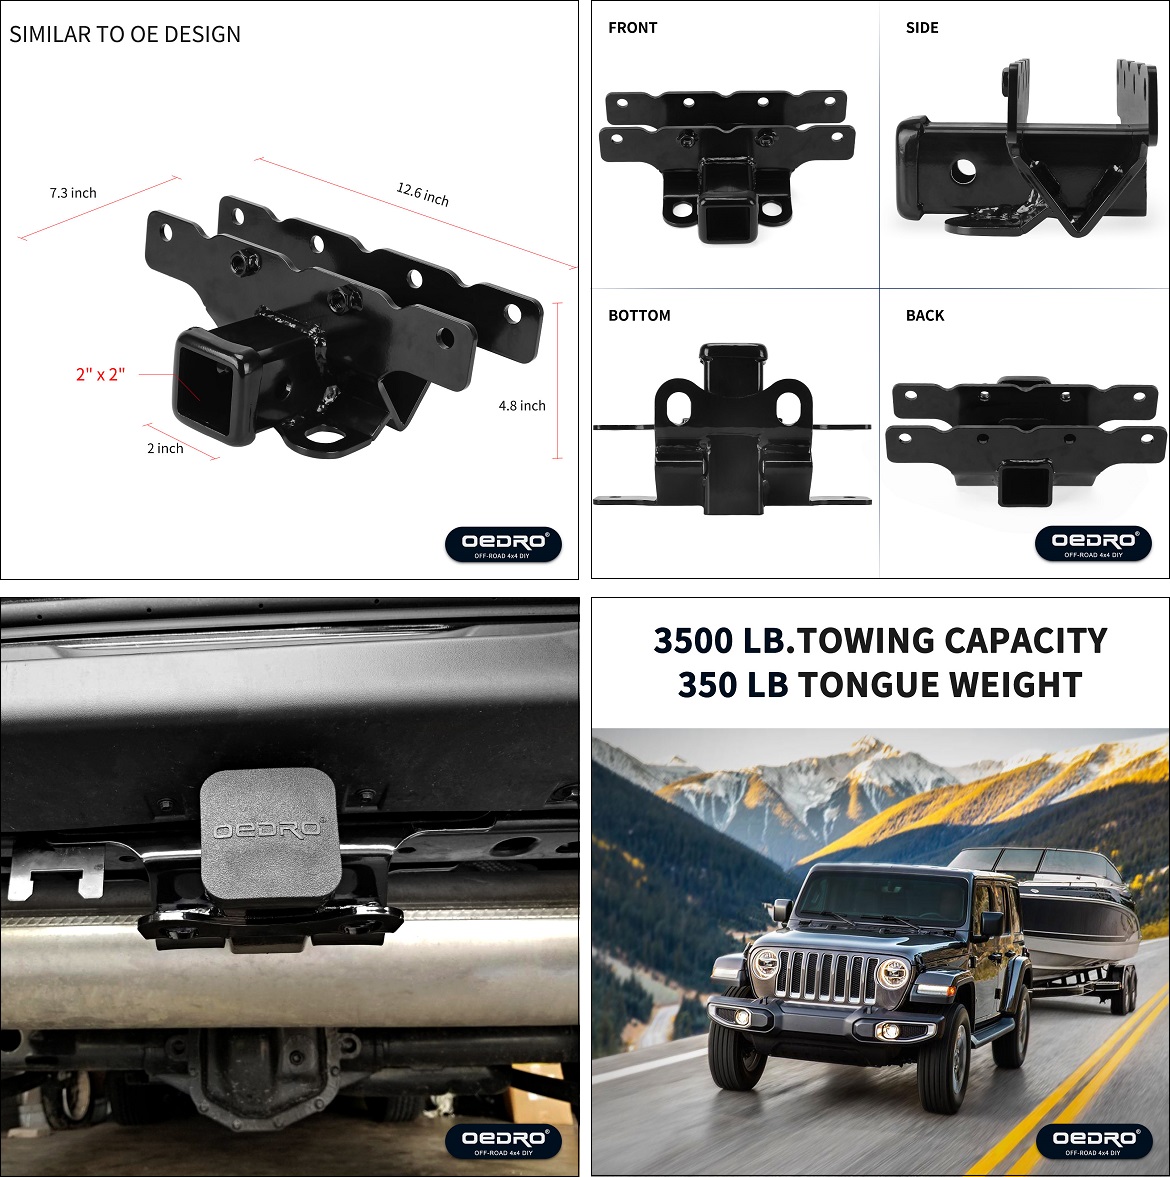 Towing Hitch Receiver 2 Inch Ball Locking Device Road Towing Kit for Jeep Wrangle JK JL 2007-2021 Accessories POKIAUTO Rear Trailer Hitch Kit for Jeep Wrangle JK JL 